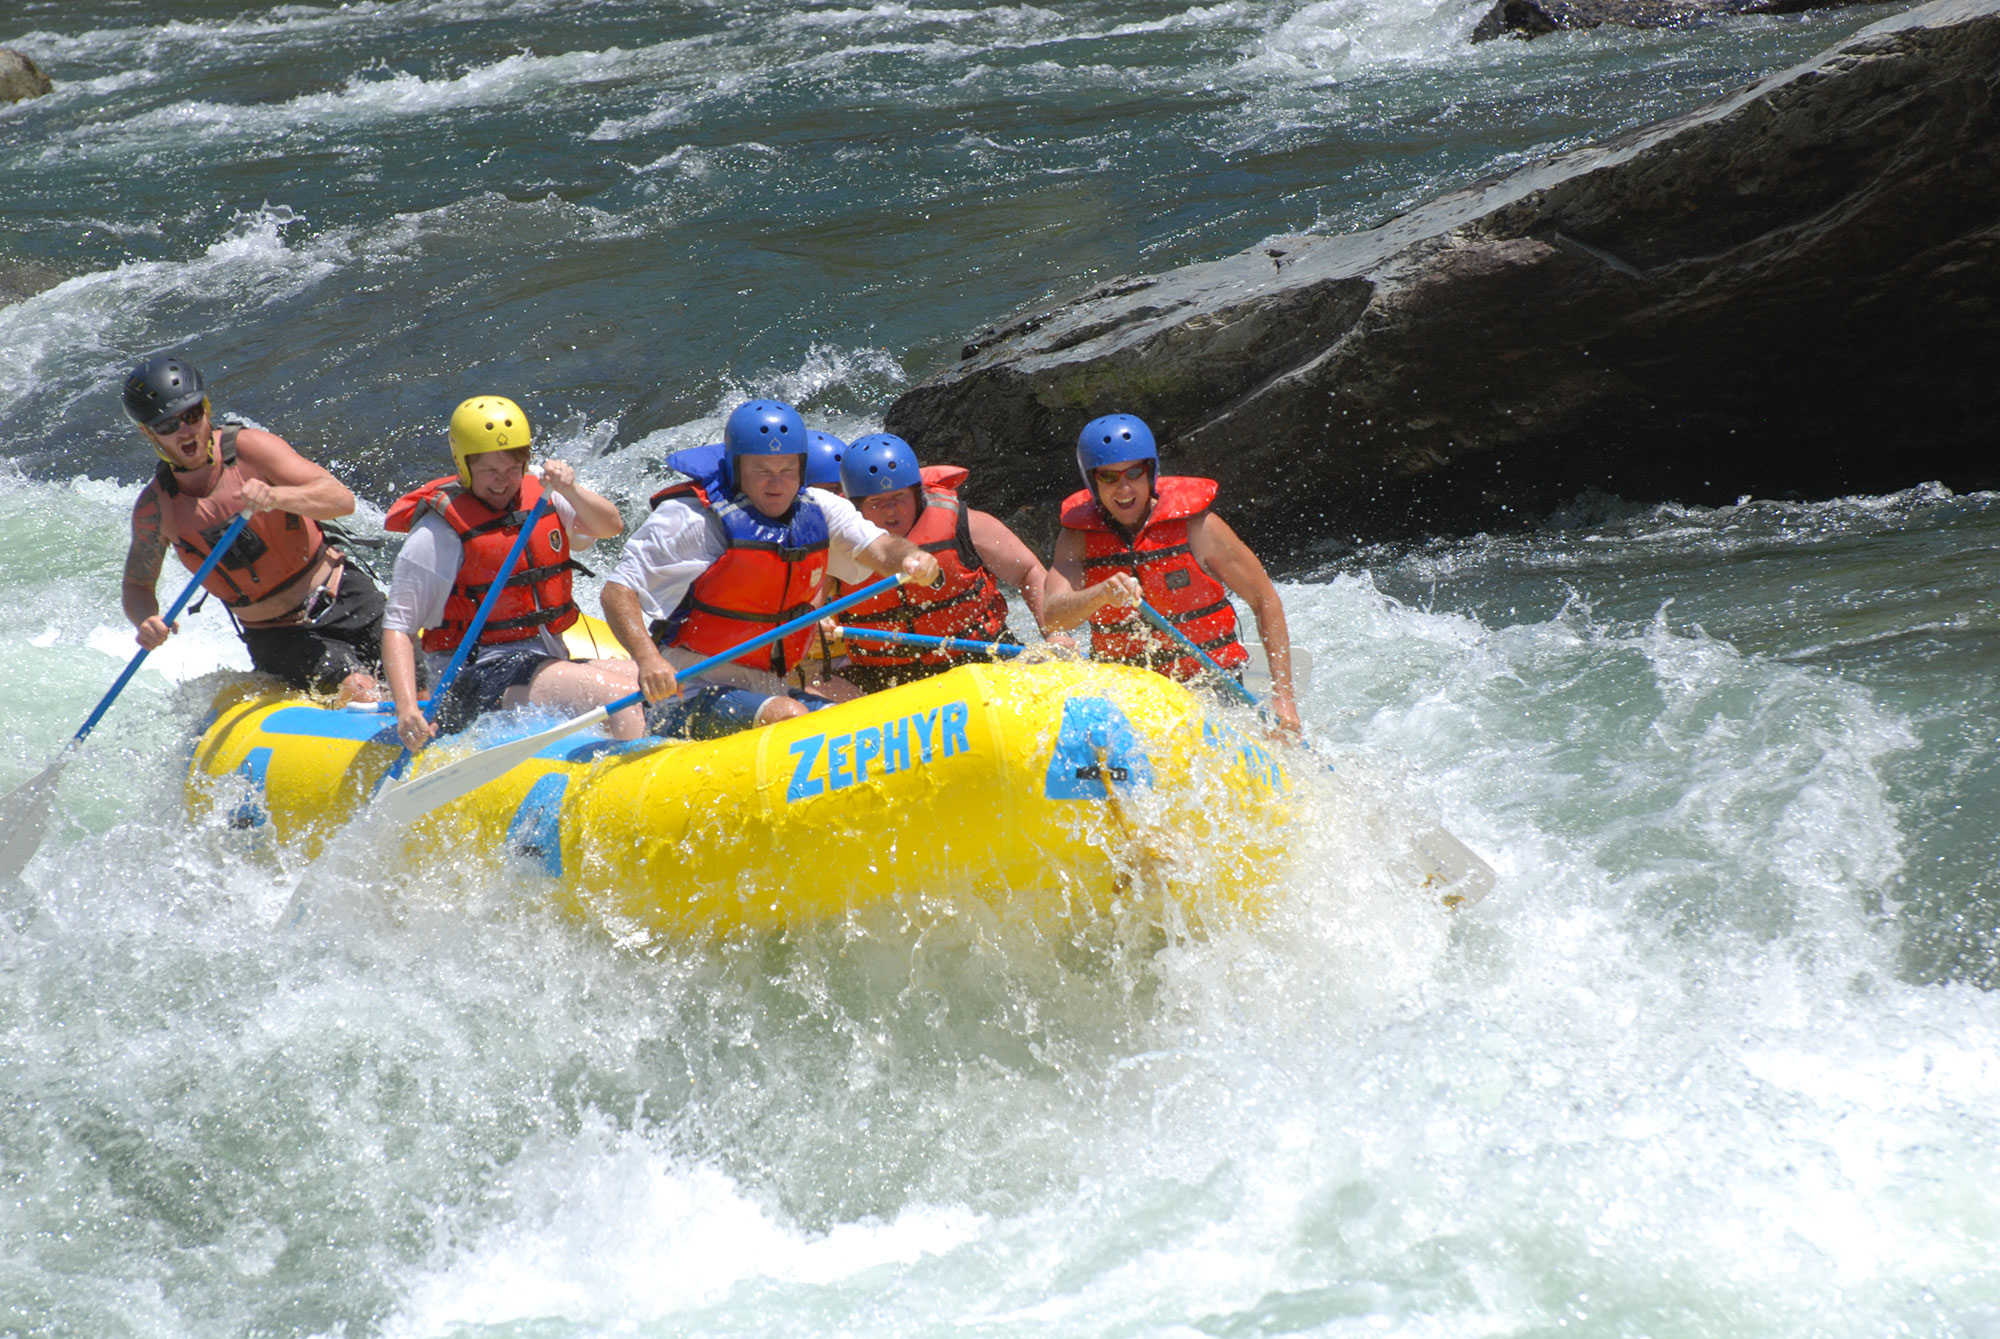 Best White Water Rafting Day Trips Near Los Angeles - CBS Los Angeles